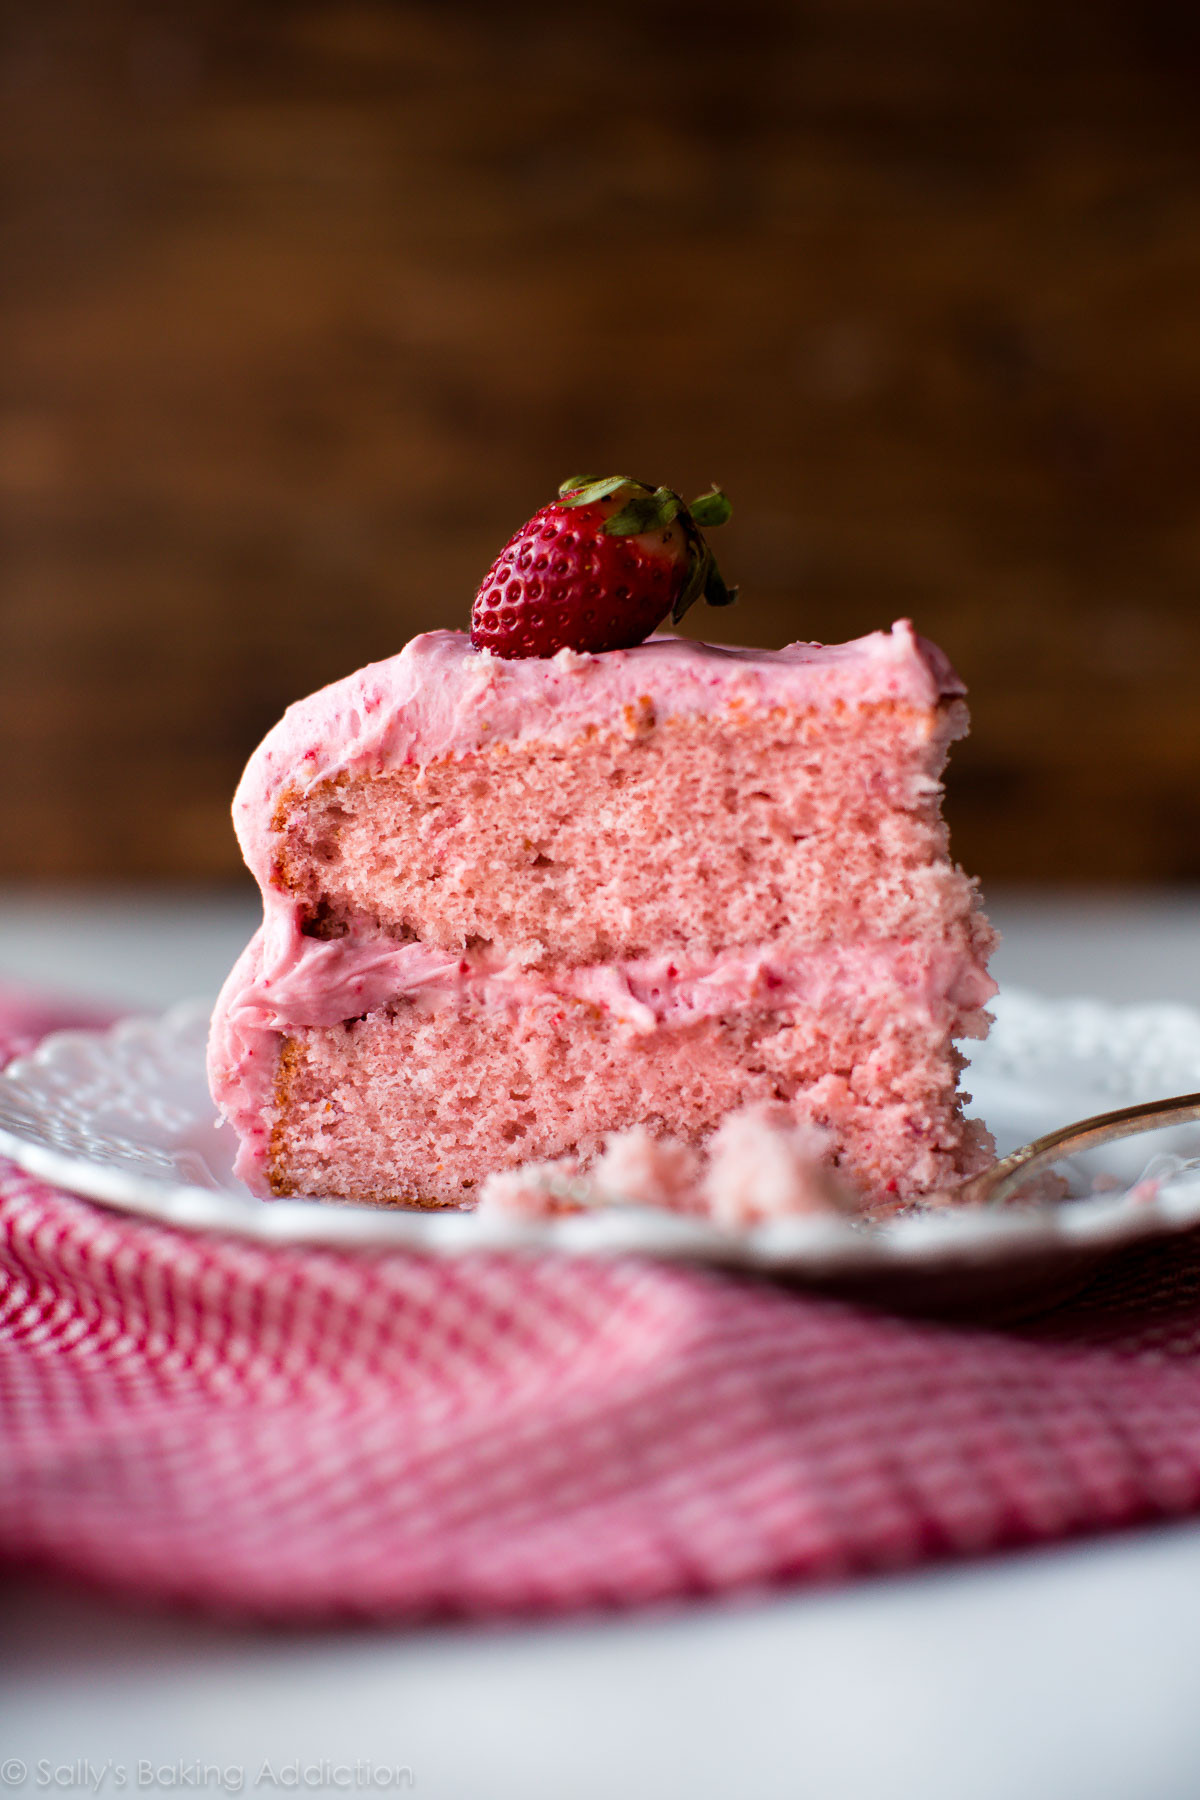 Healthy Cake Recipes From Scratch
 Homemade Strawberry Cake Sallys Baking Addiction